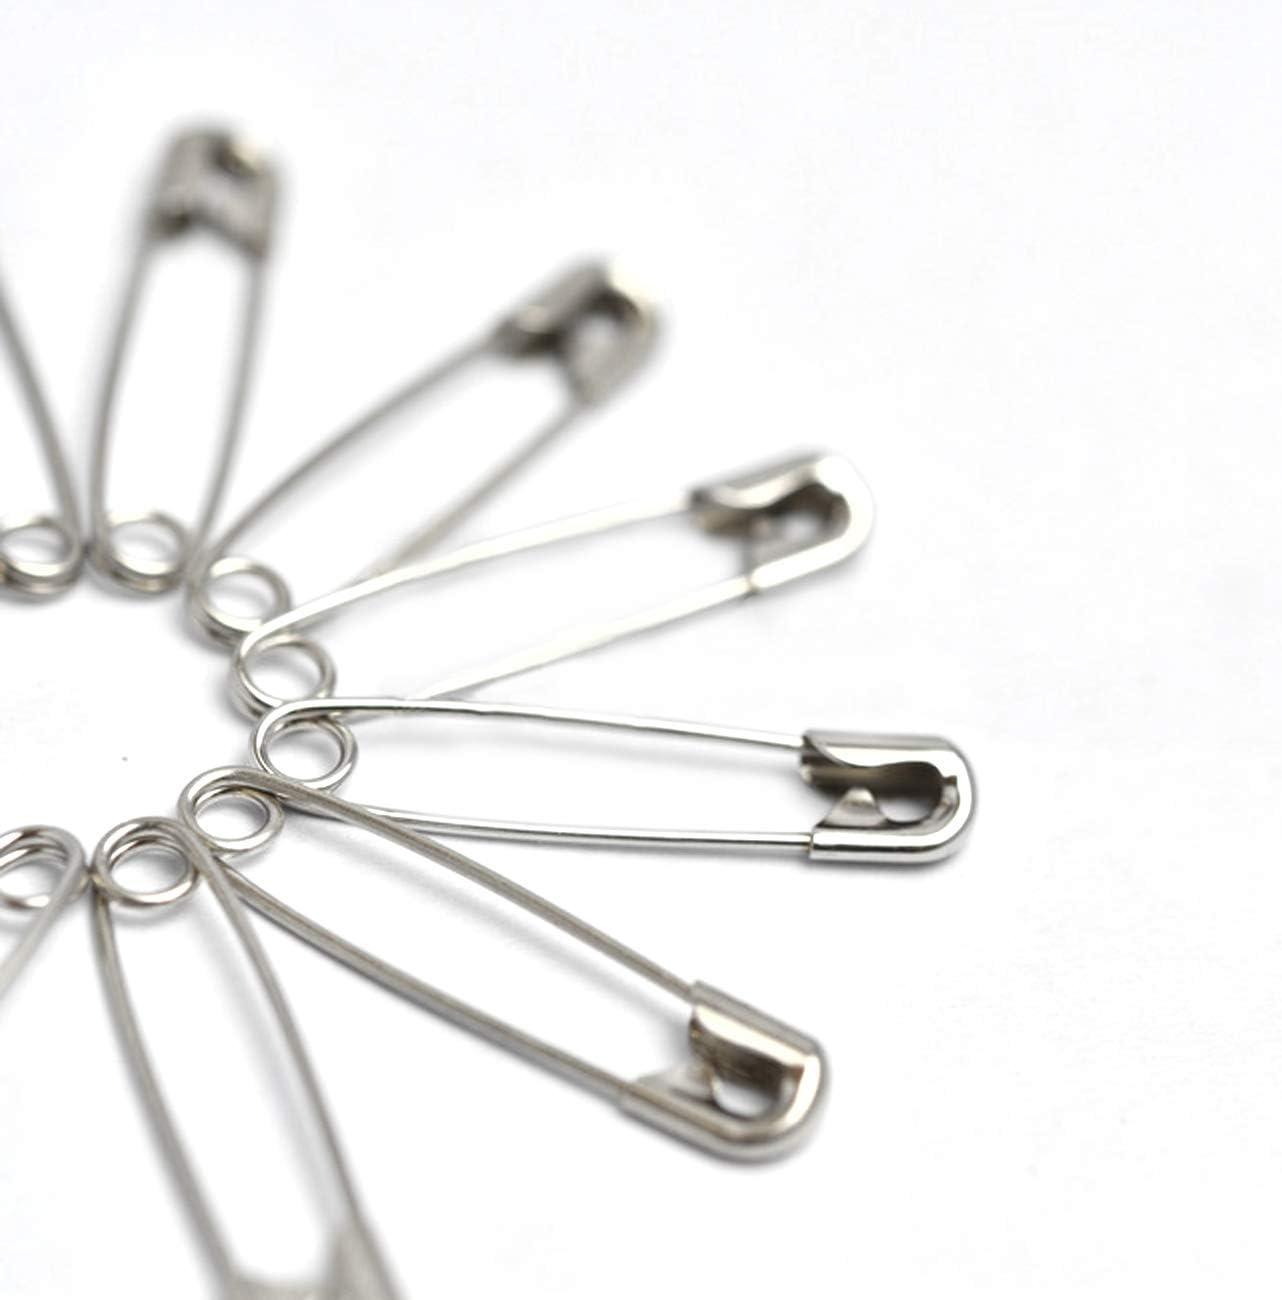 1000Pieces -Safety Pins, 1.1 inch Safety Pins Bulk Metal Silver Sewing Pins Clothing Clips Tool 28mm/ 1.1 inch Decorative Safety Pins, Sewing